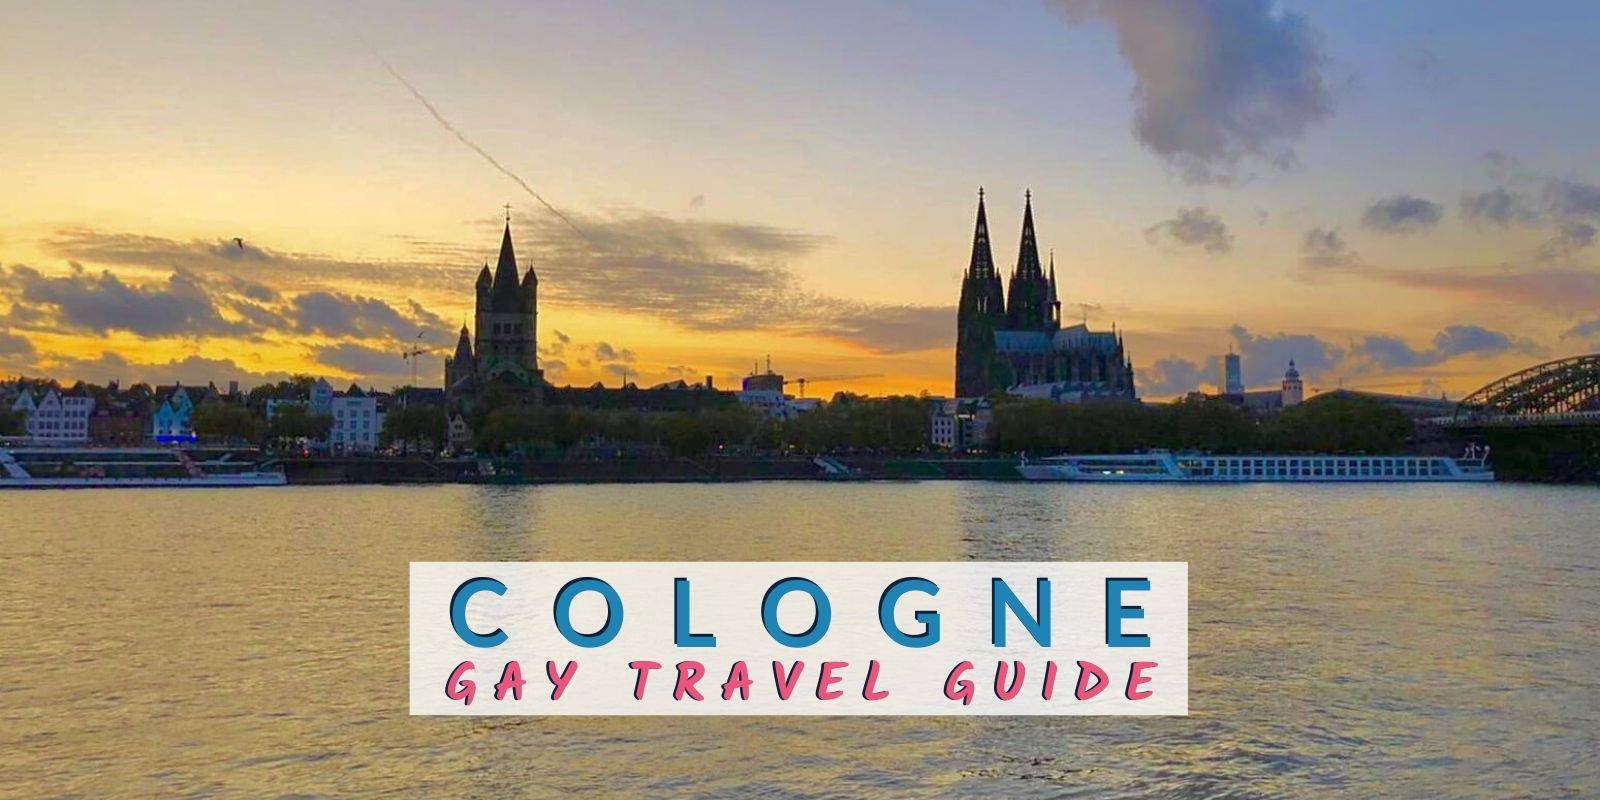 Read our travel guide to Cologne, including the best gay bars, clubs, events, hotels to stay in and so much more.